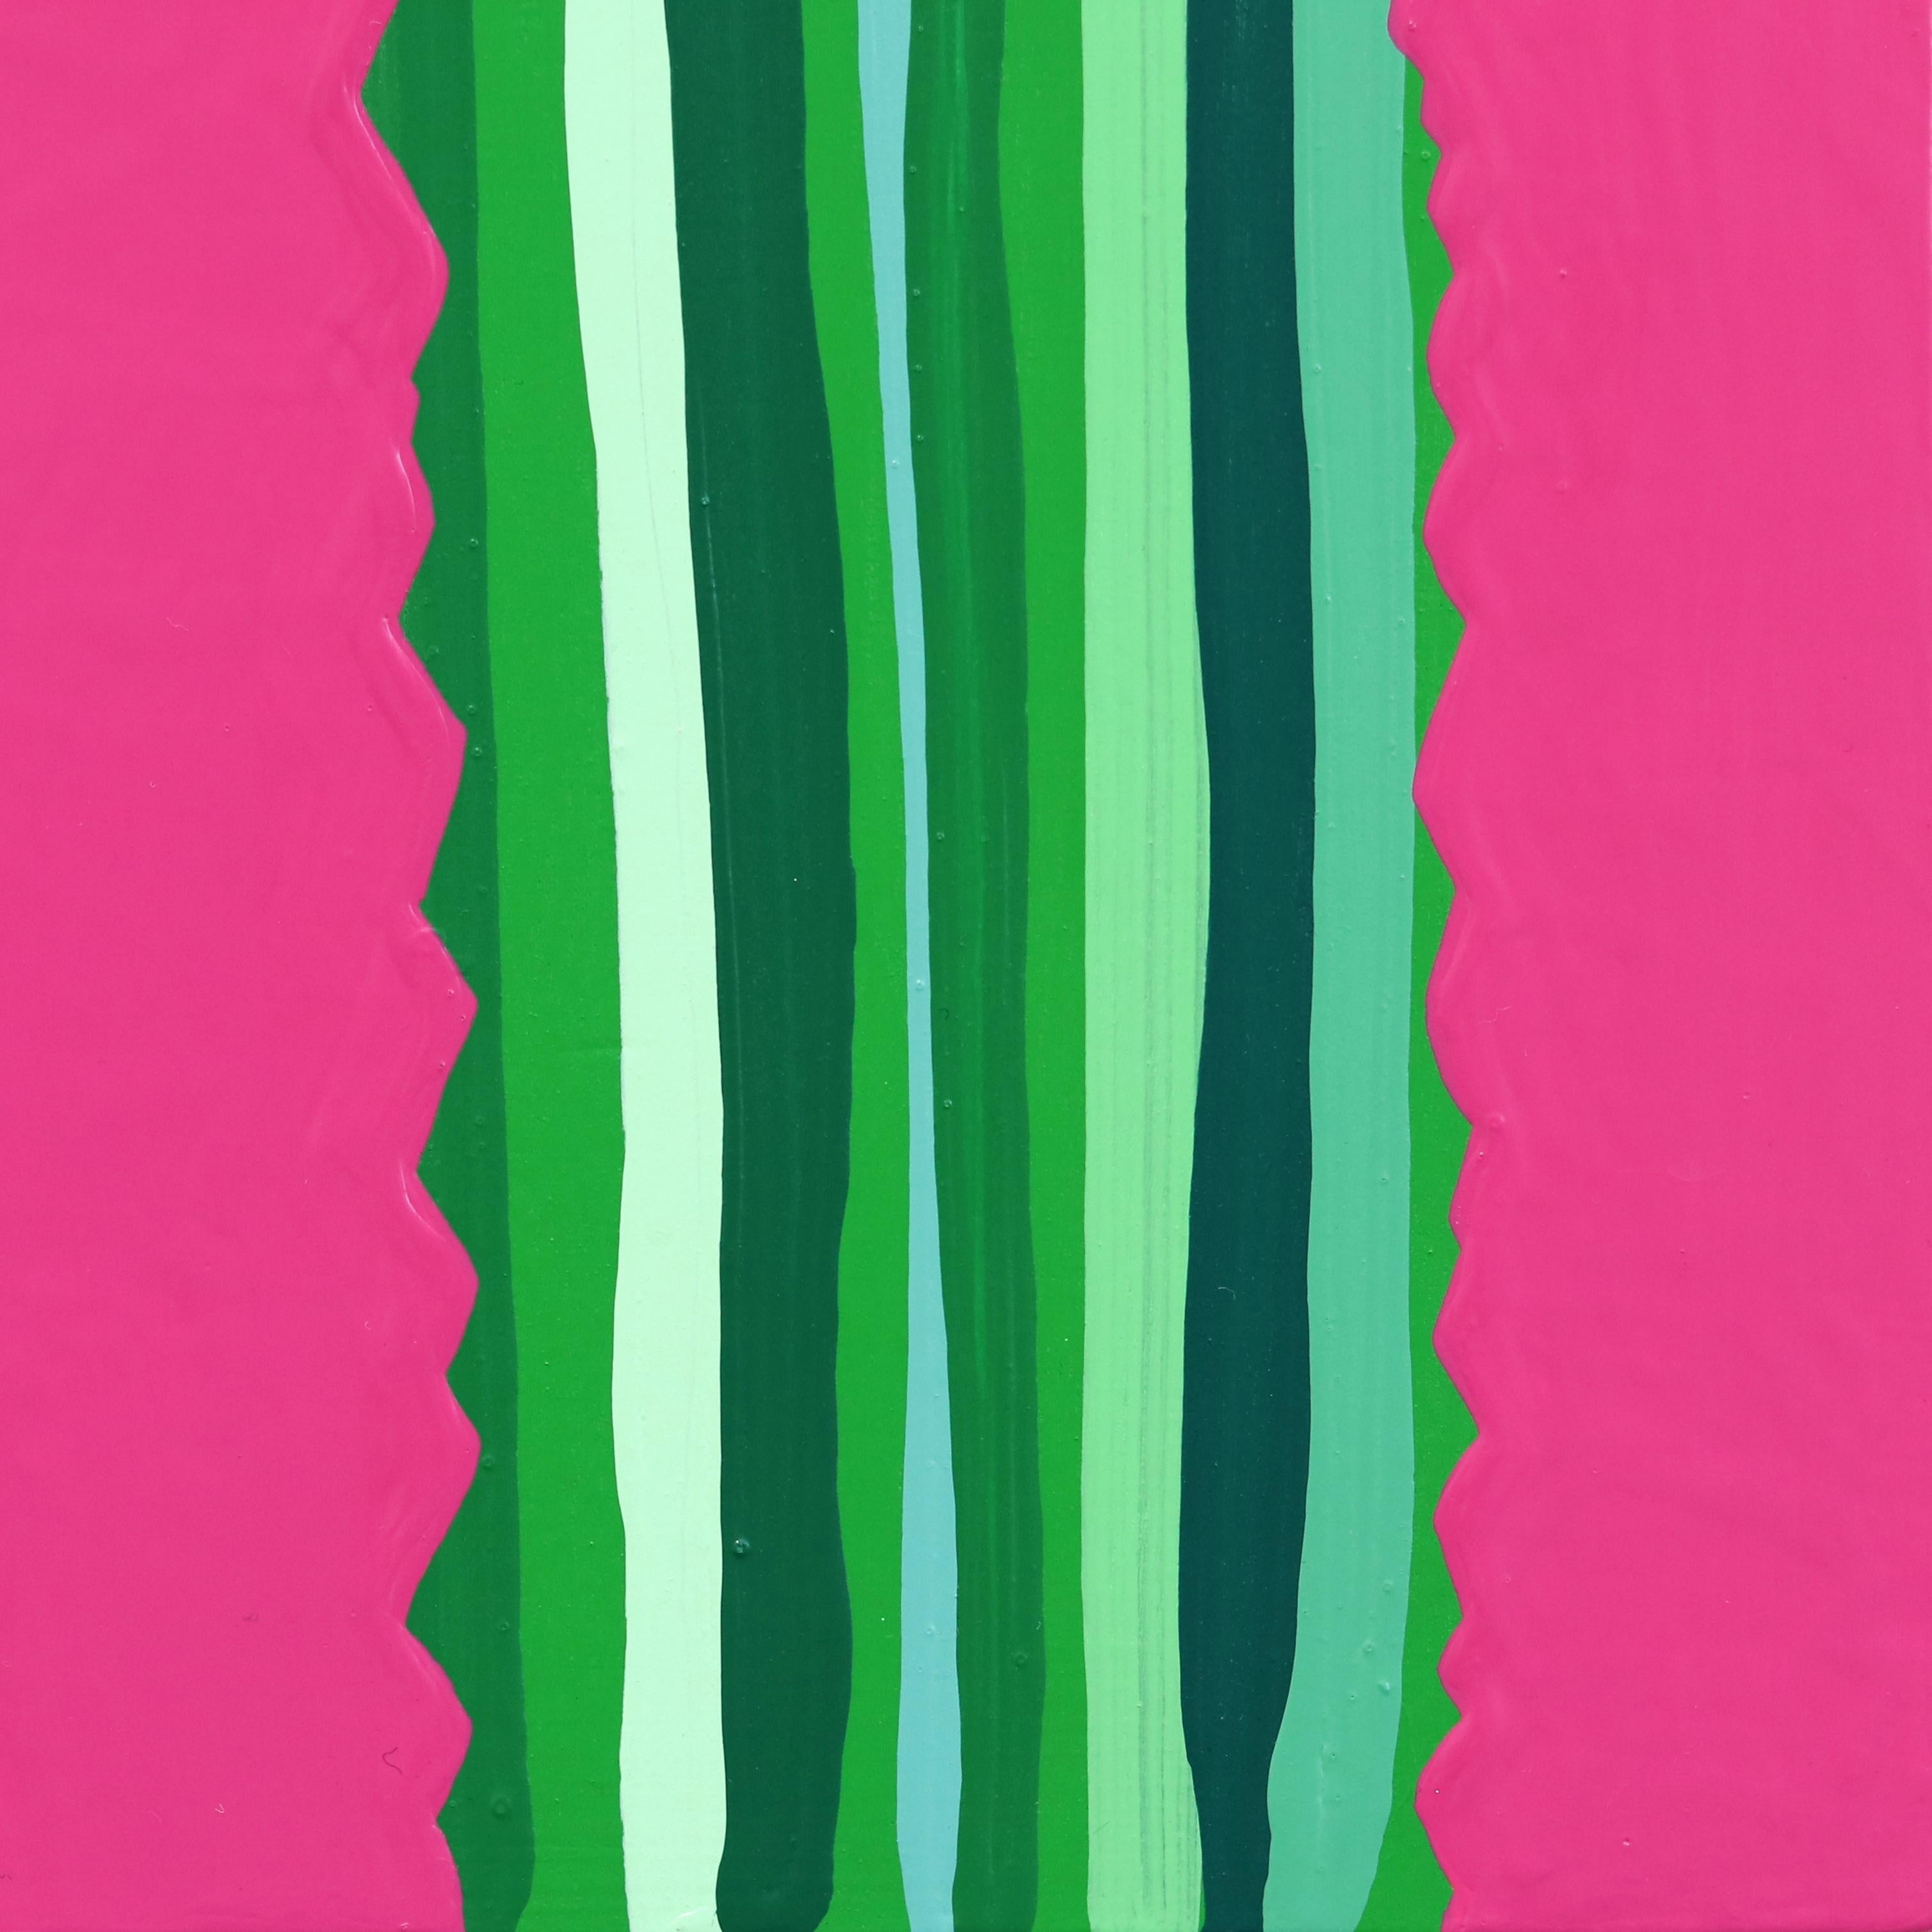 Rosa Picante - Vibrant Pink Green Southwest Inspired Pop Art Cactus Painting For Sale 6